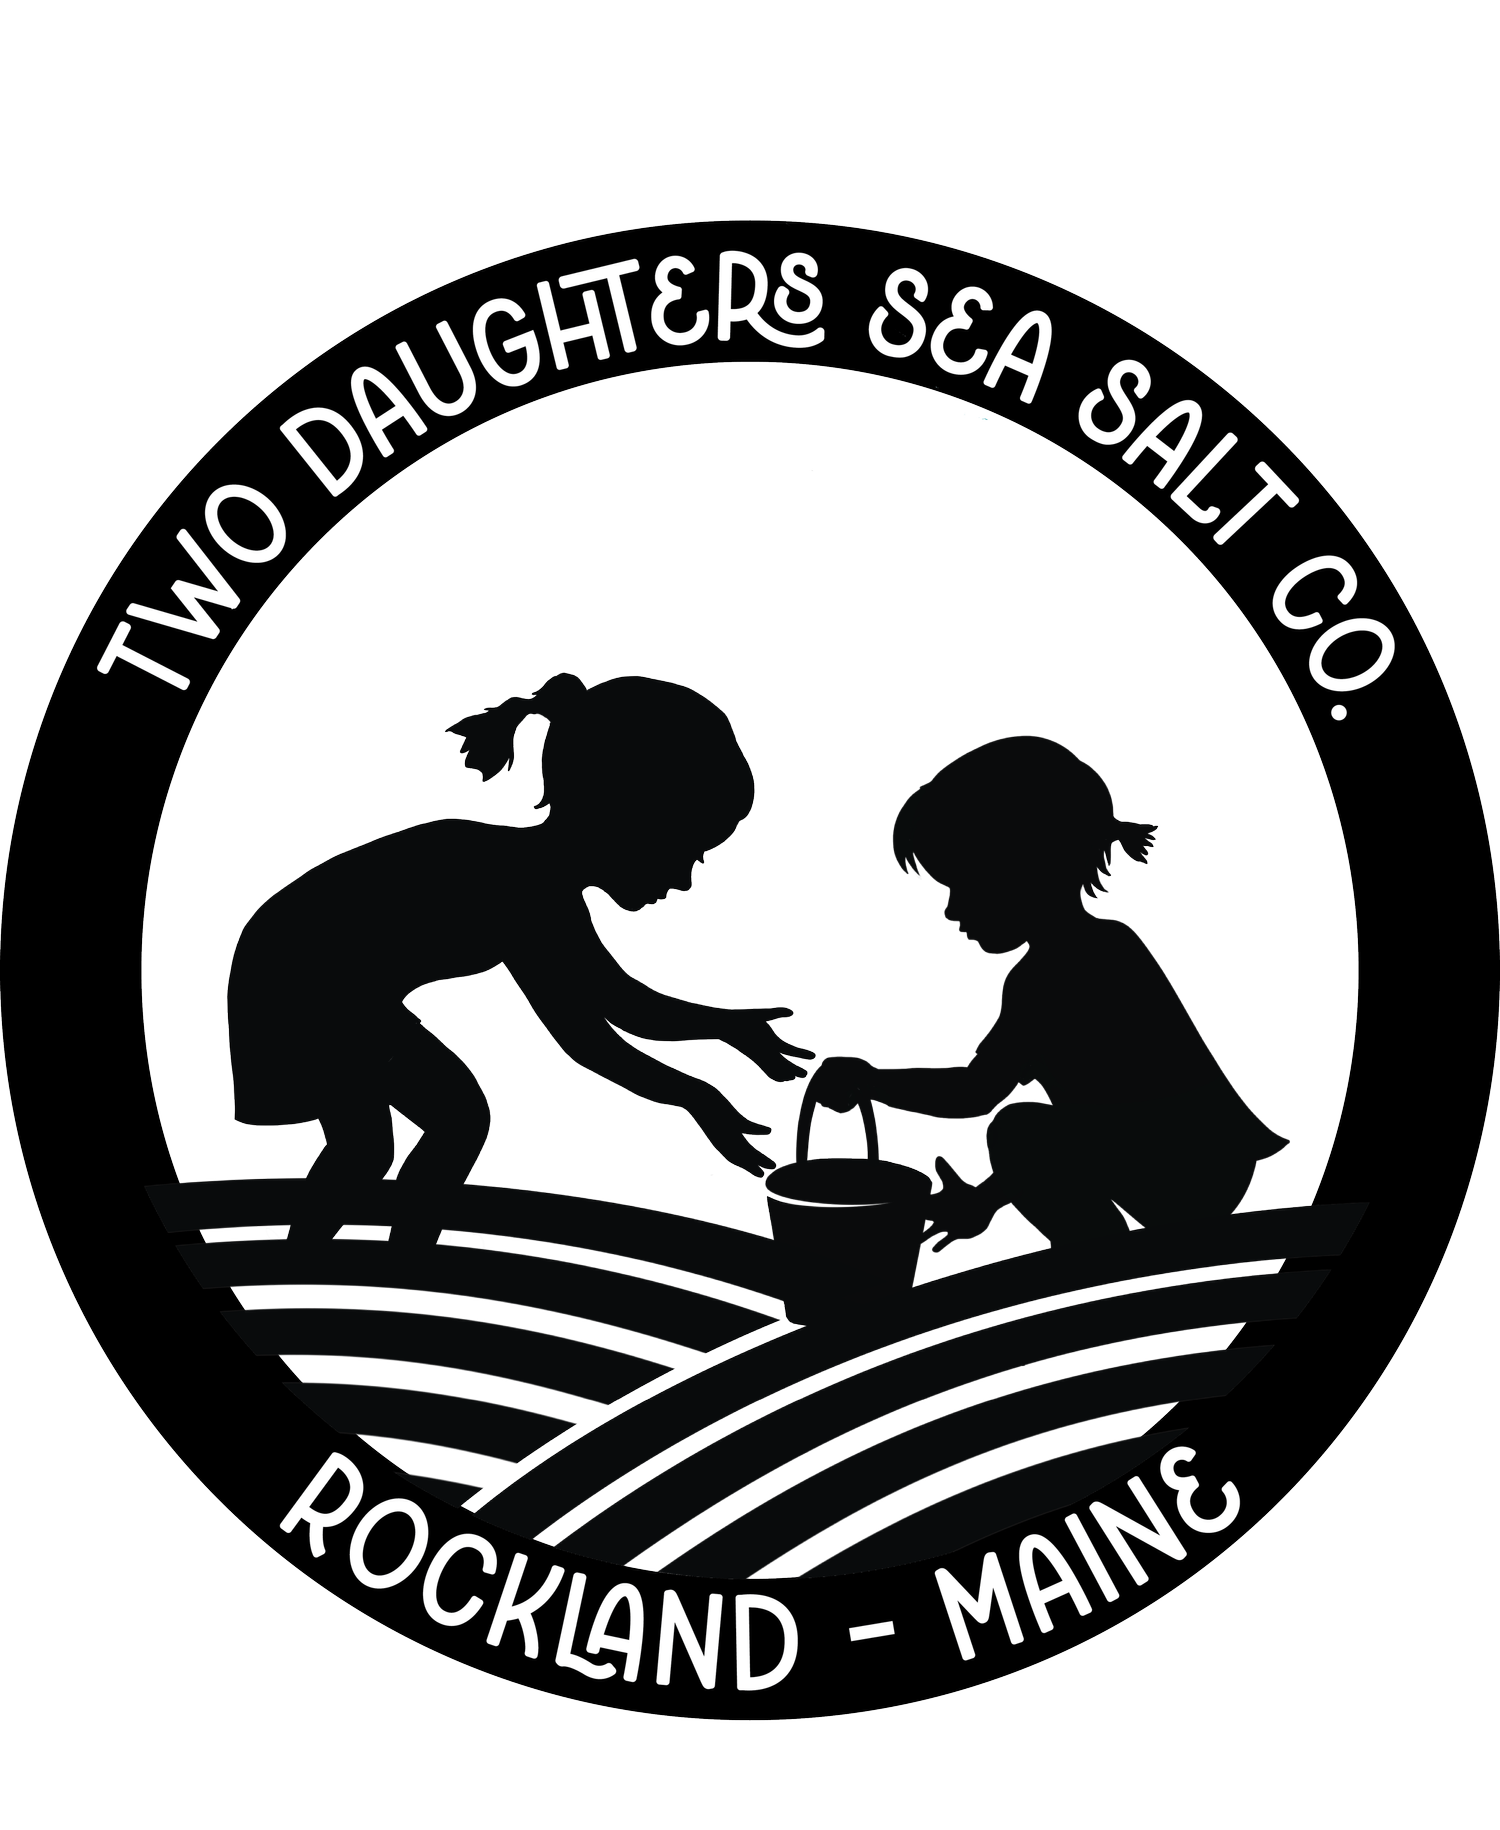 Two Daughters Sea Salt Co.